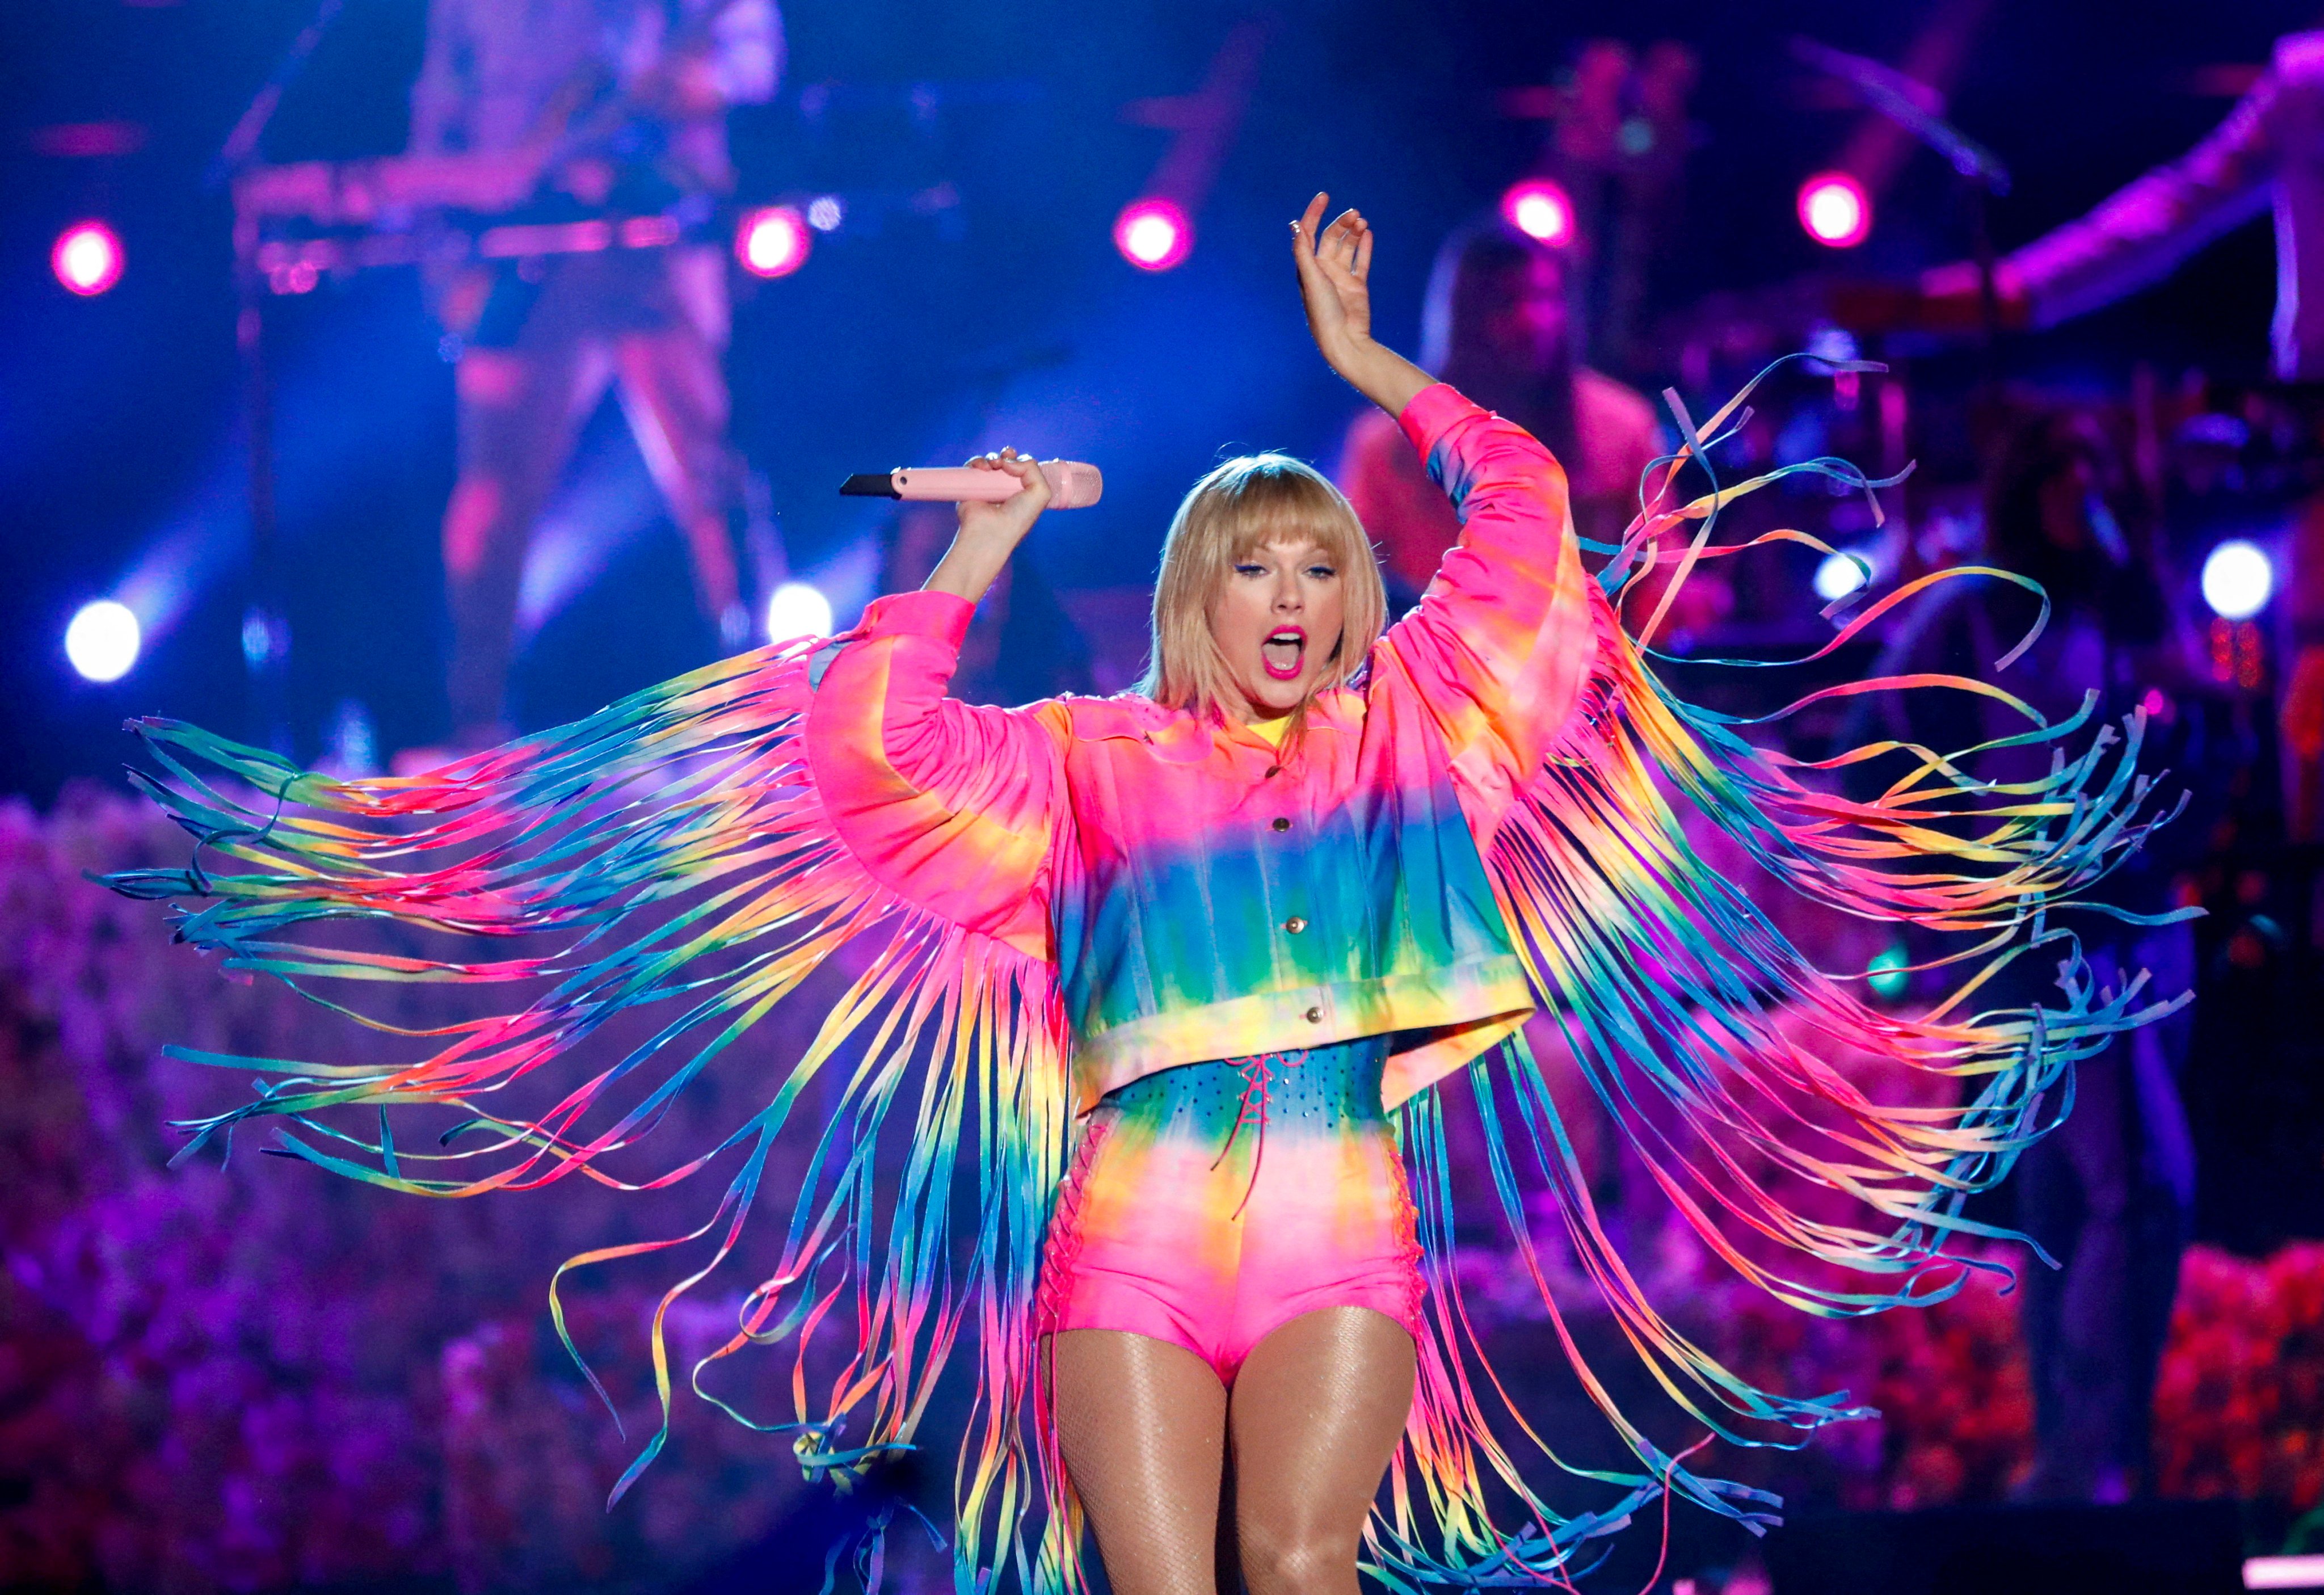 Taylor Swift performs at the iHeartRadio Wango Tango concert in California, in the United States, in 2019. Touring musical superstars such as Swift are aiding the growth of music tourism. Photo: Reuters